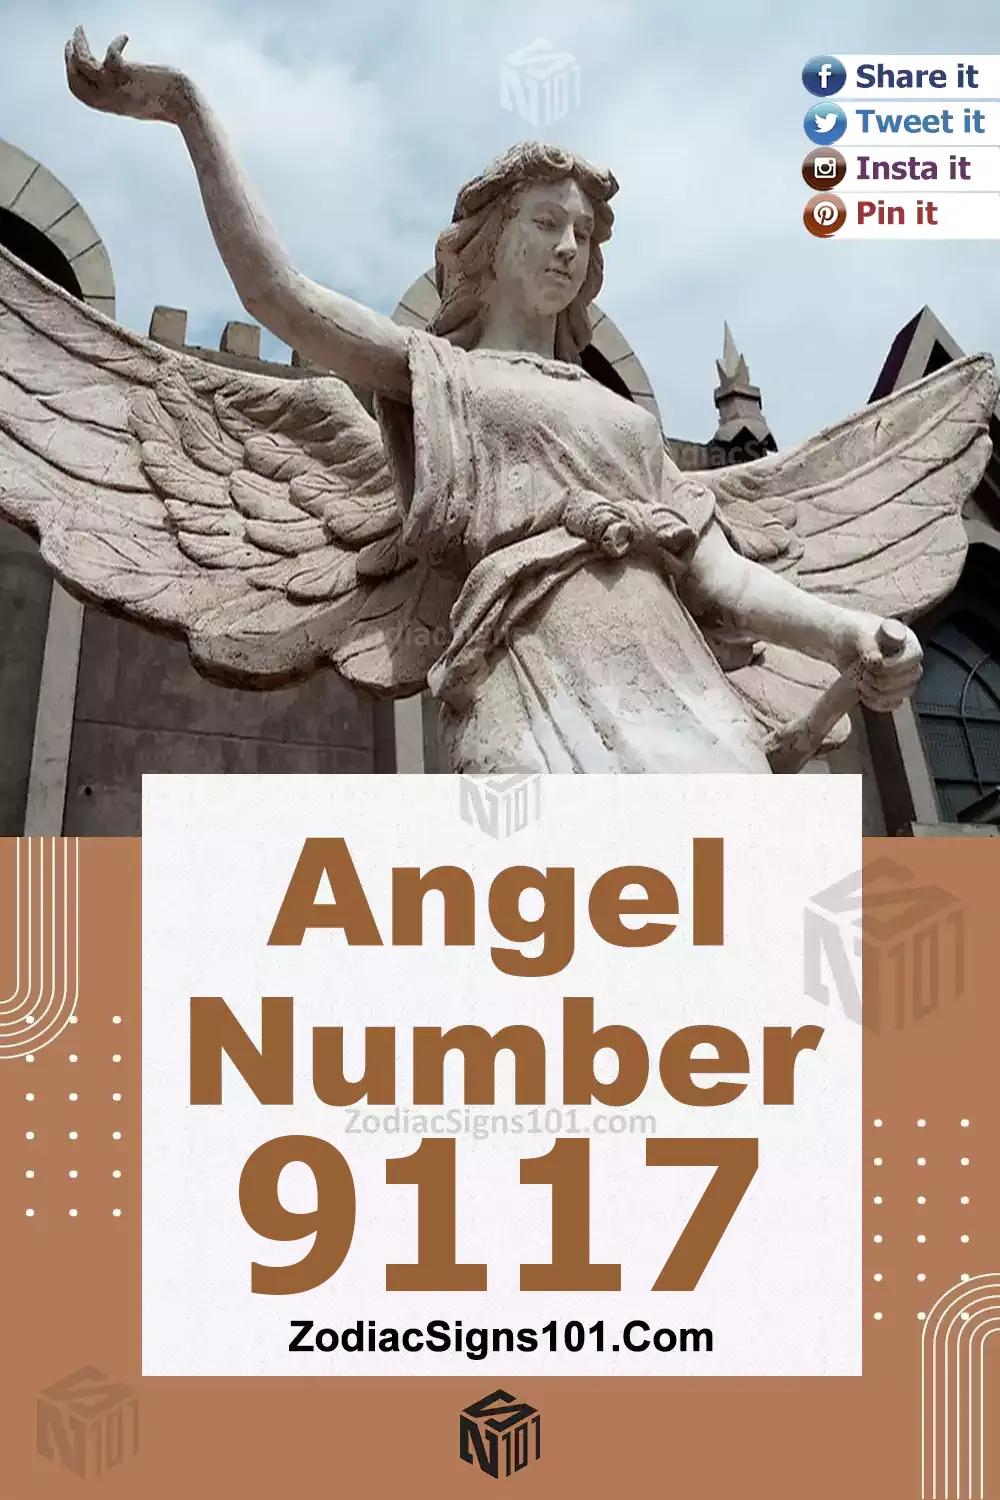 9117 Angel Number Meaning